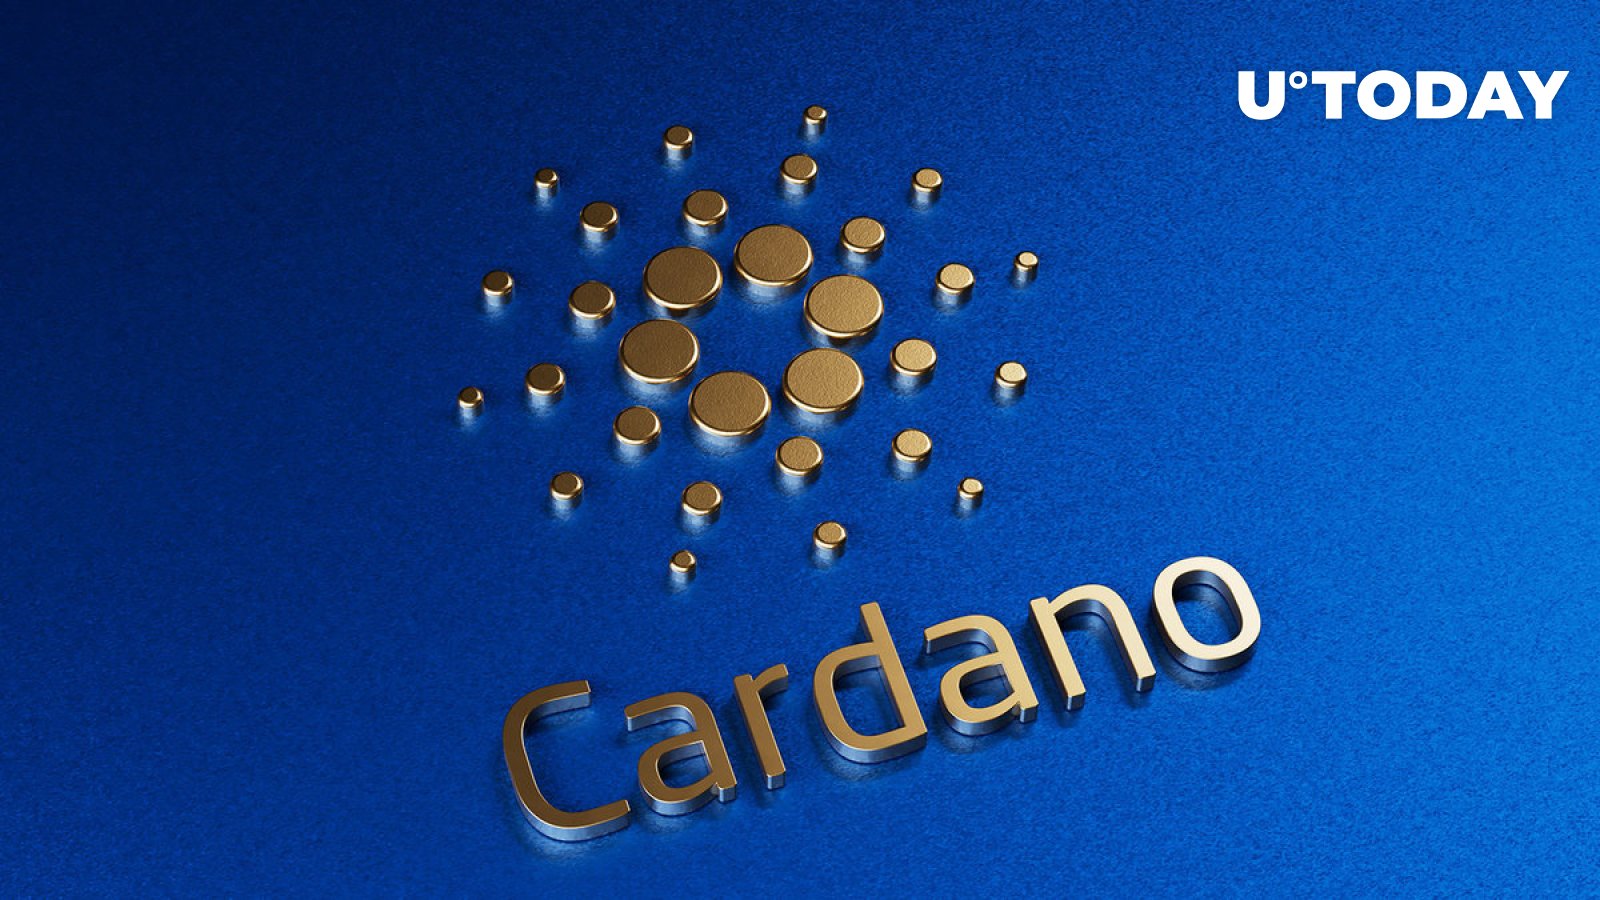 Here Are 3 Key Cardano (ADA) Levels You Need To Watch